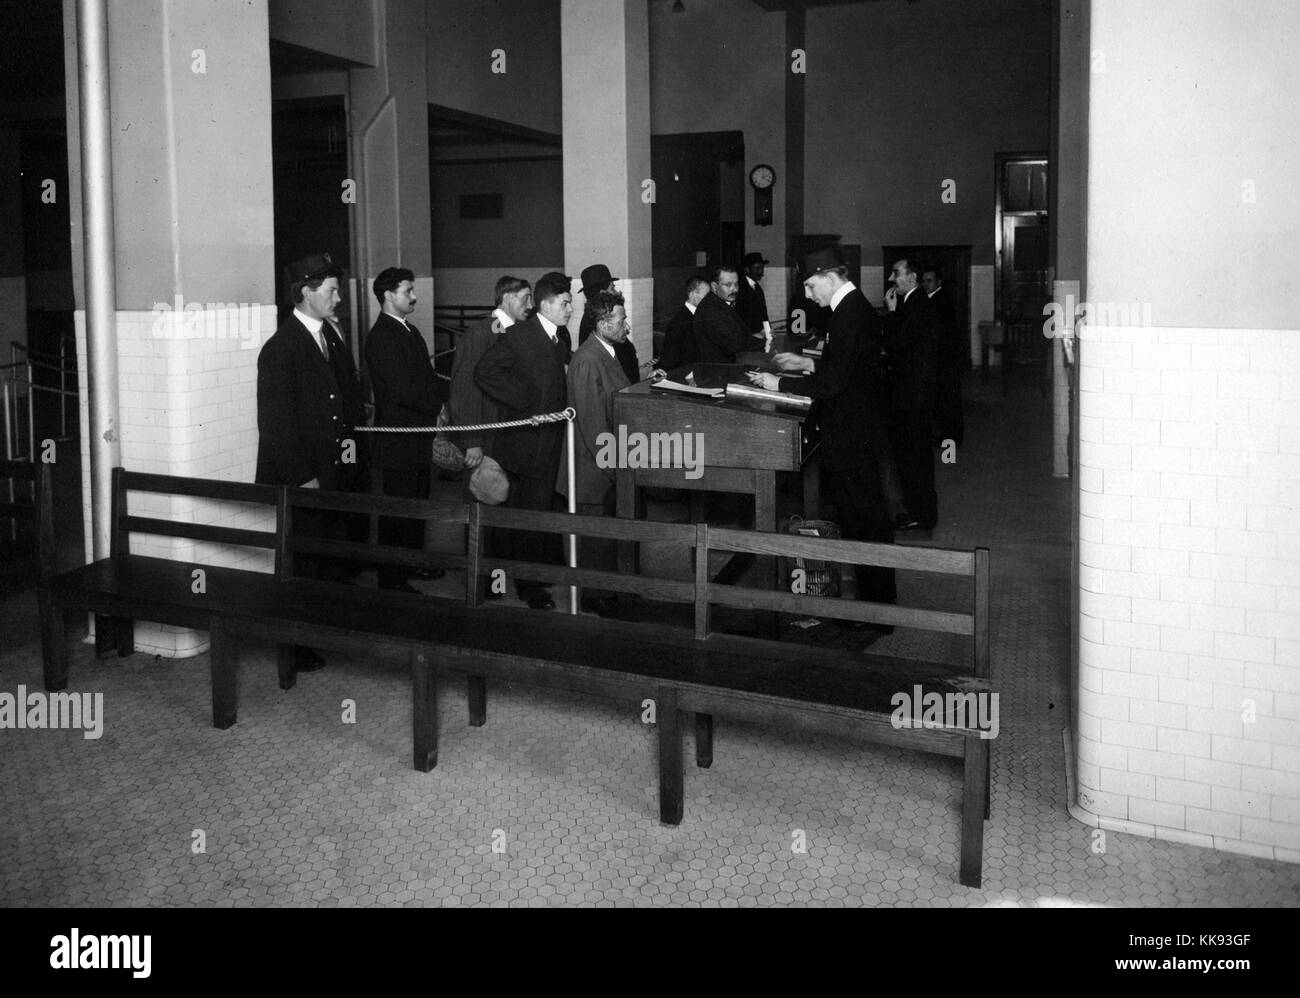 Black and white photograph of immigrants waiting in line for processing by Immigration Bureau officials, by Edwin Levick, Ellis Island, New York, 1907. From the New York Public Library. Stock Photo